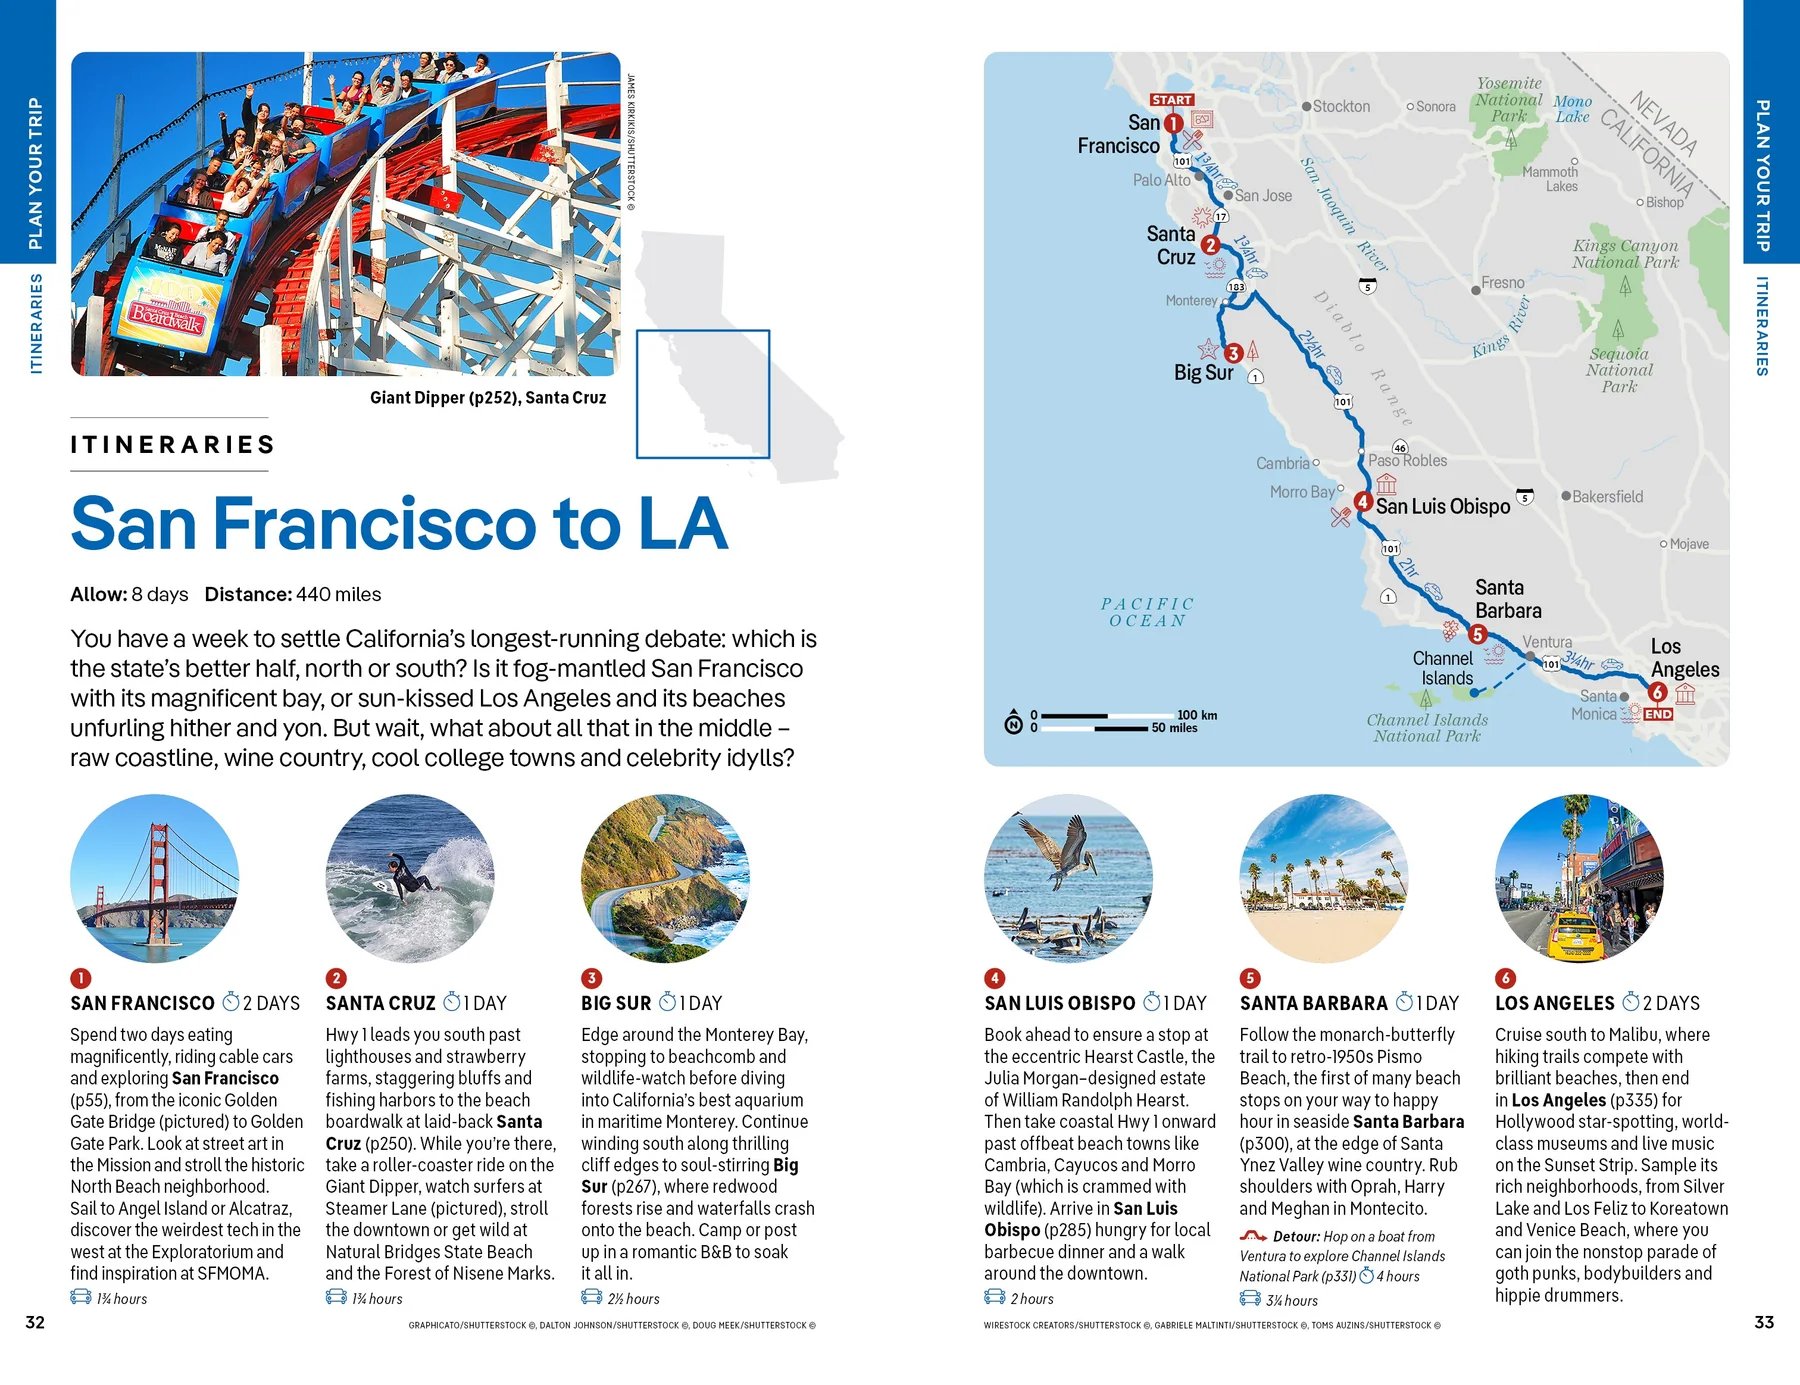 California Lonely Planet